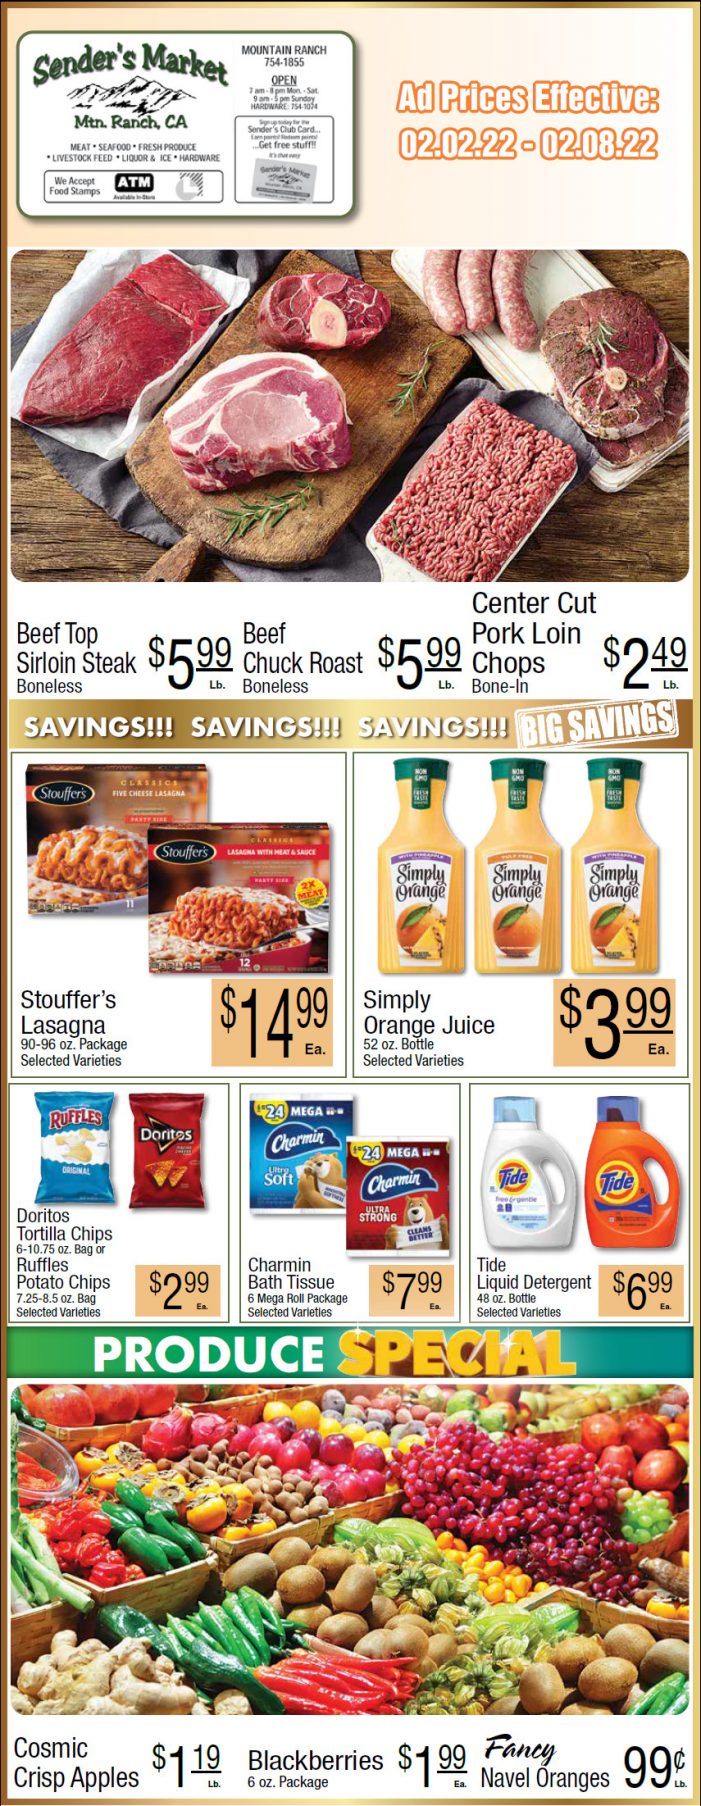 Sender’s Market’s Weekly Ad & Grocery Specials February 2nd ~ 8th! Shop Local & Save!